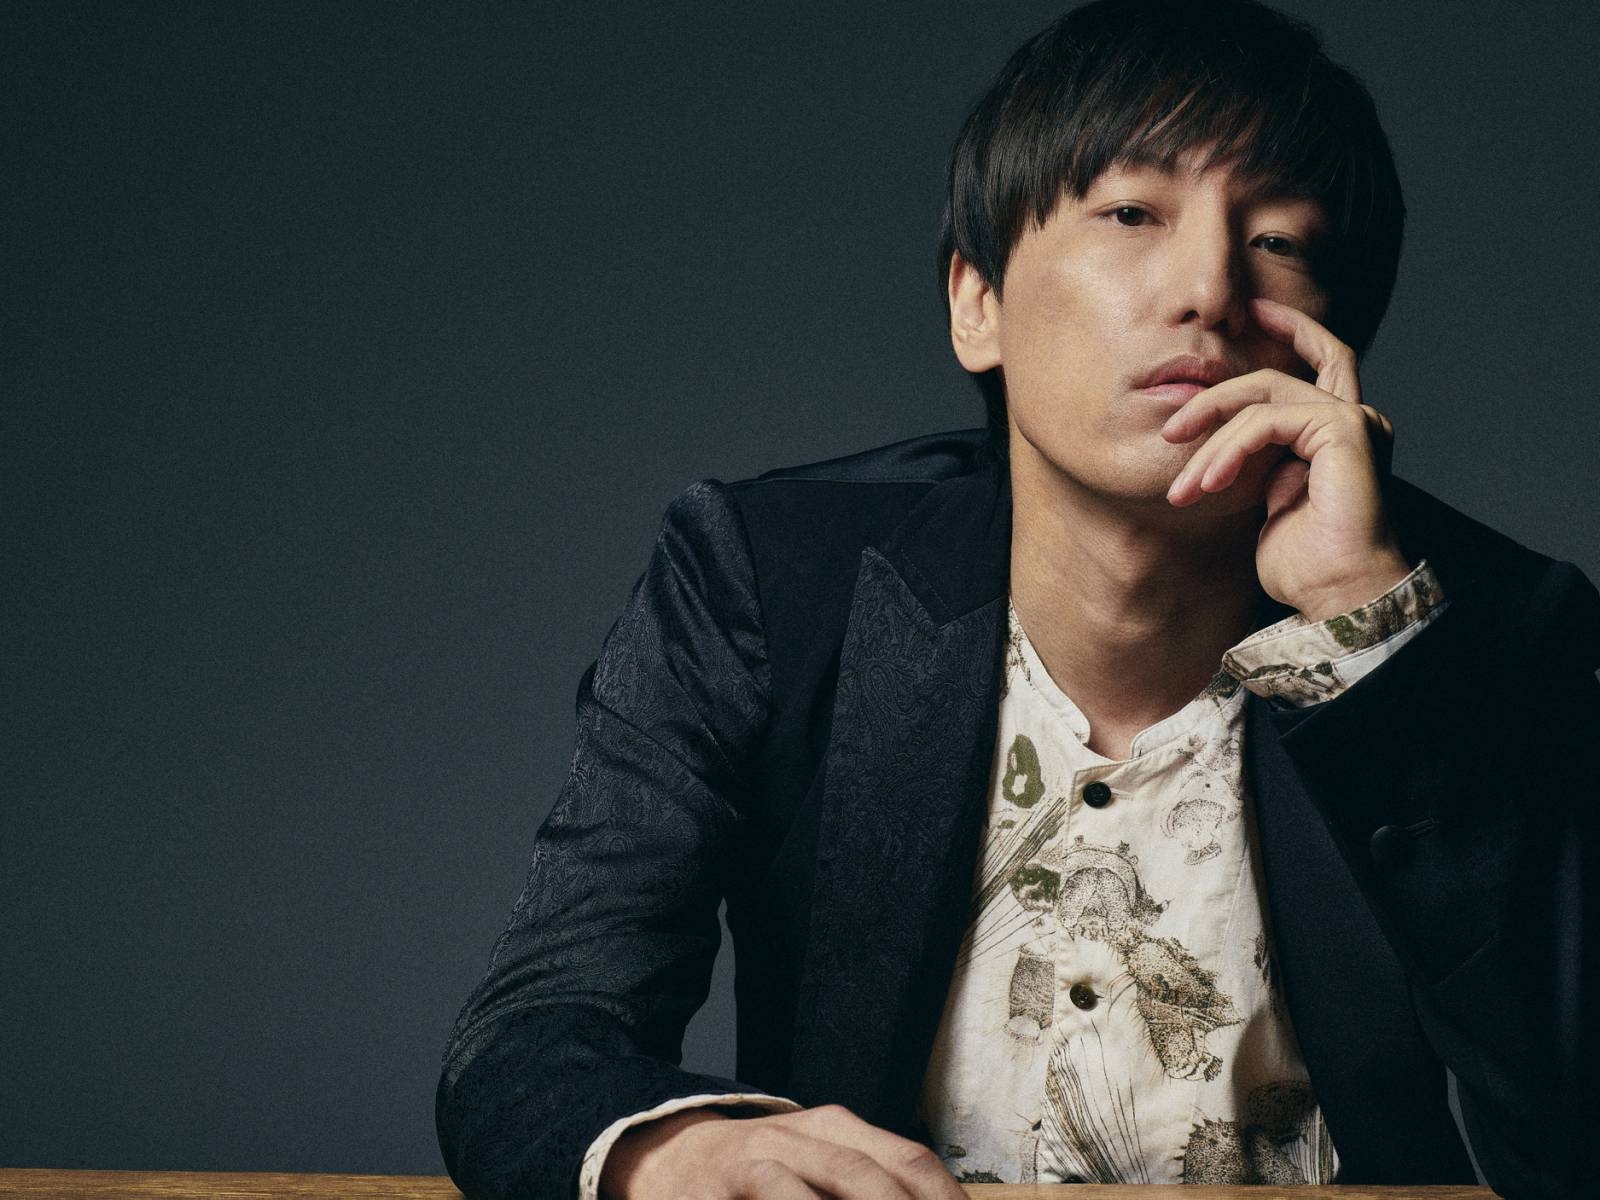 Acclaimed Japanese composer SawanoHiroyuki[nZk] links up with K-Pop boyband TOMORROW x TOGETHER for SOLO LEVELING opening song “LEveL”